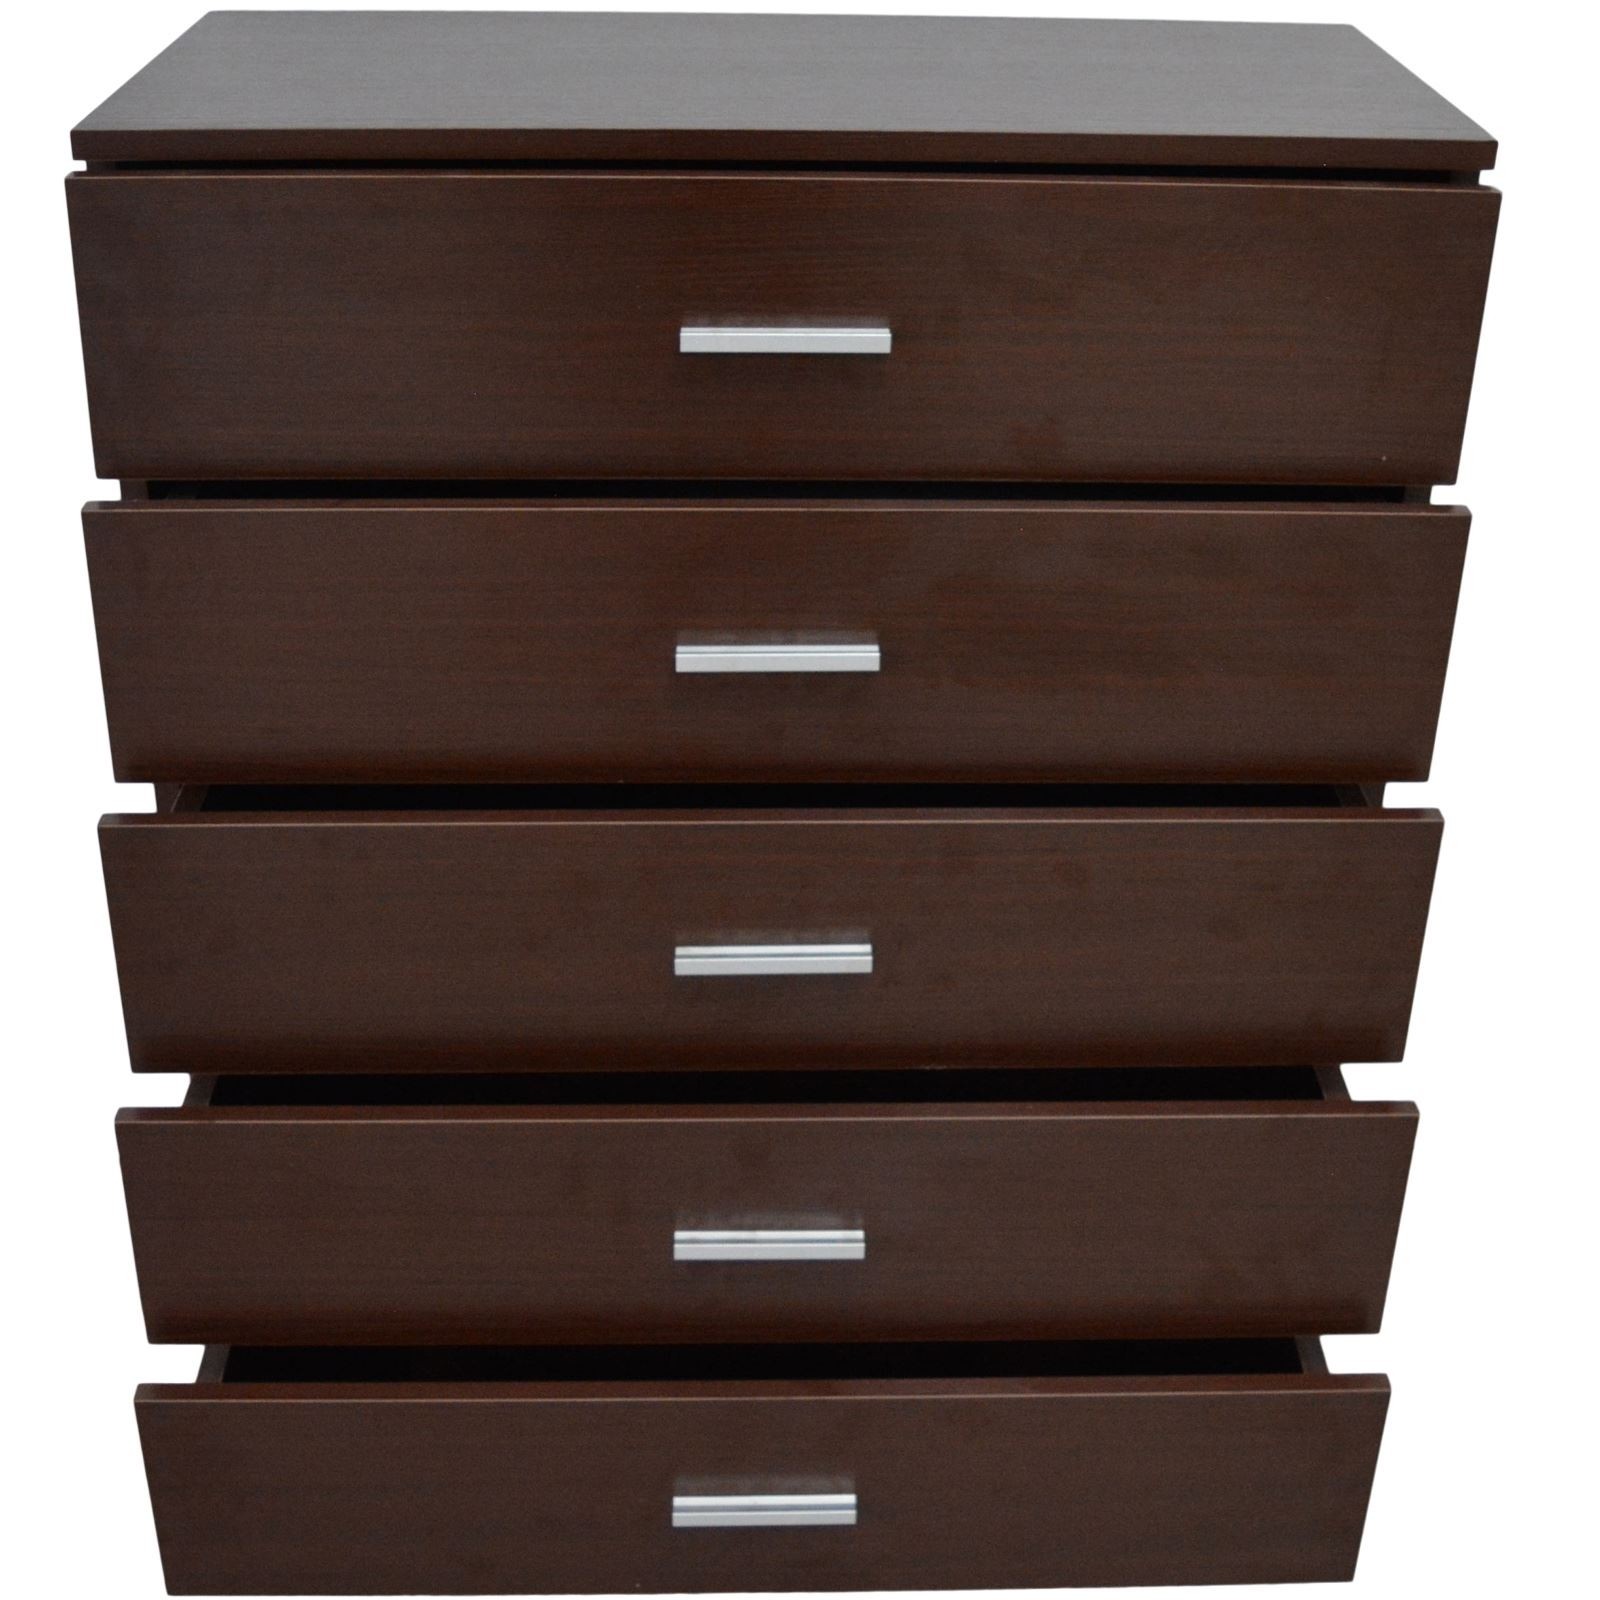 Chest of drawers bedroom furniture 5 drawer silver handles 1